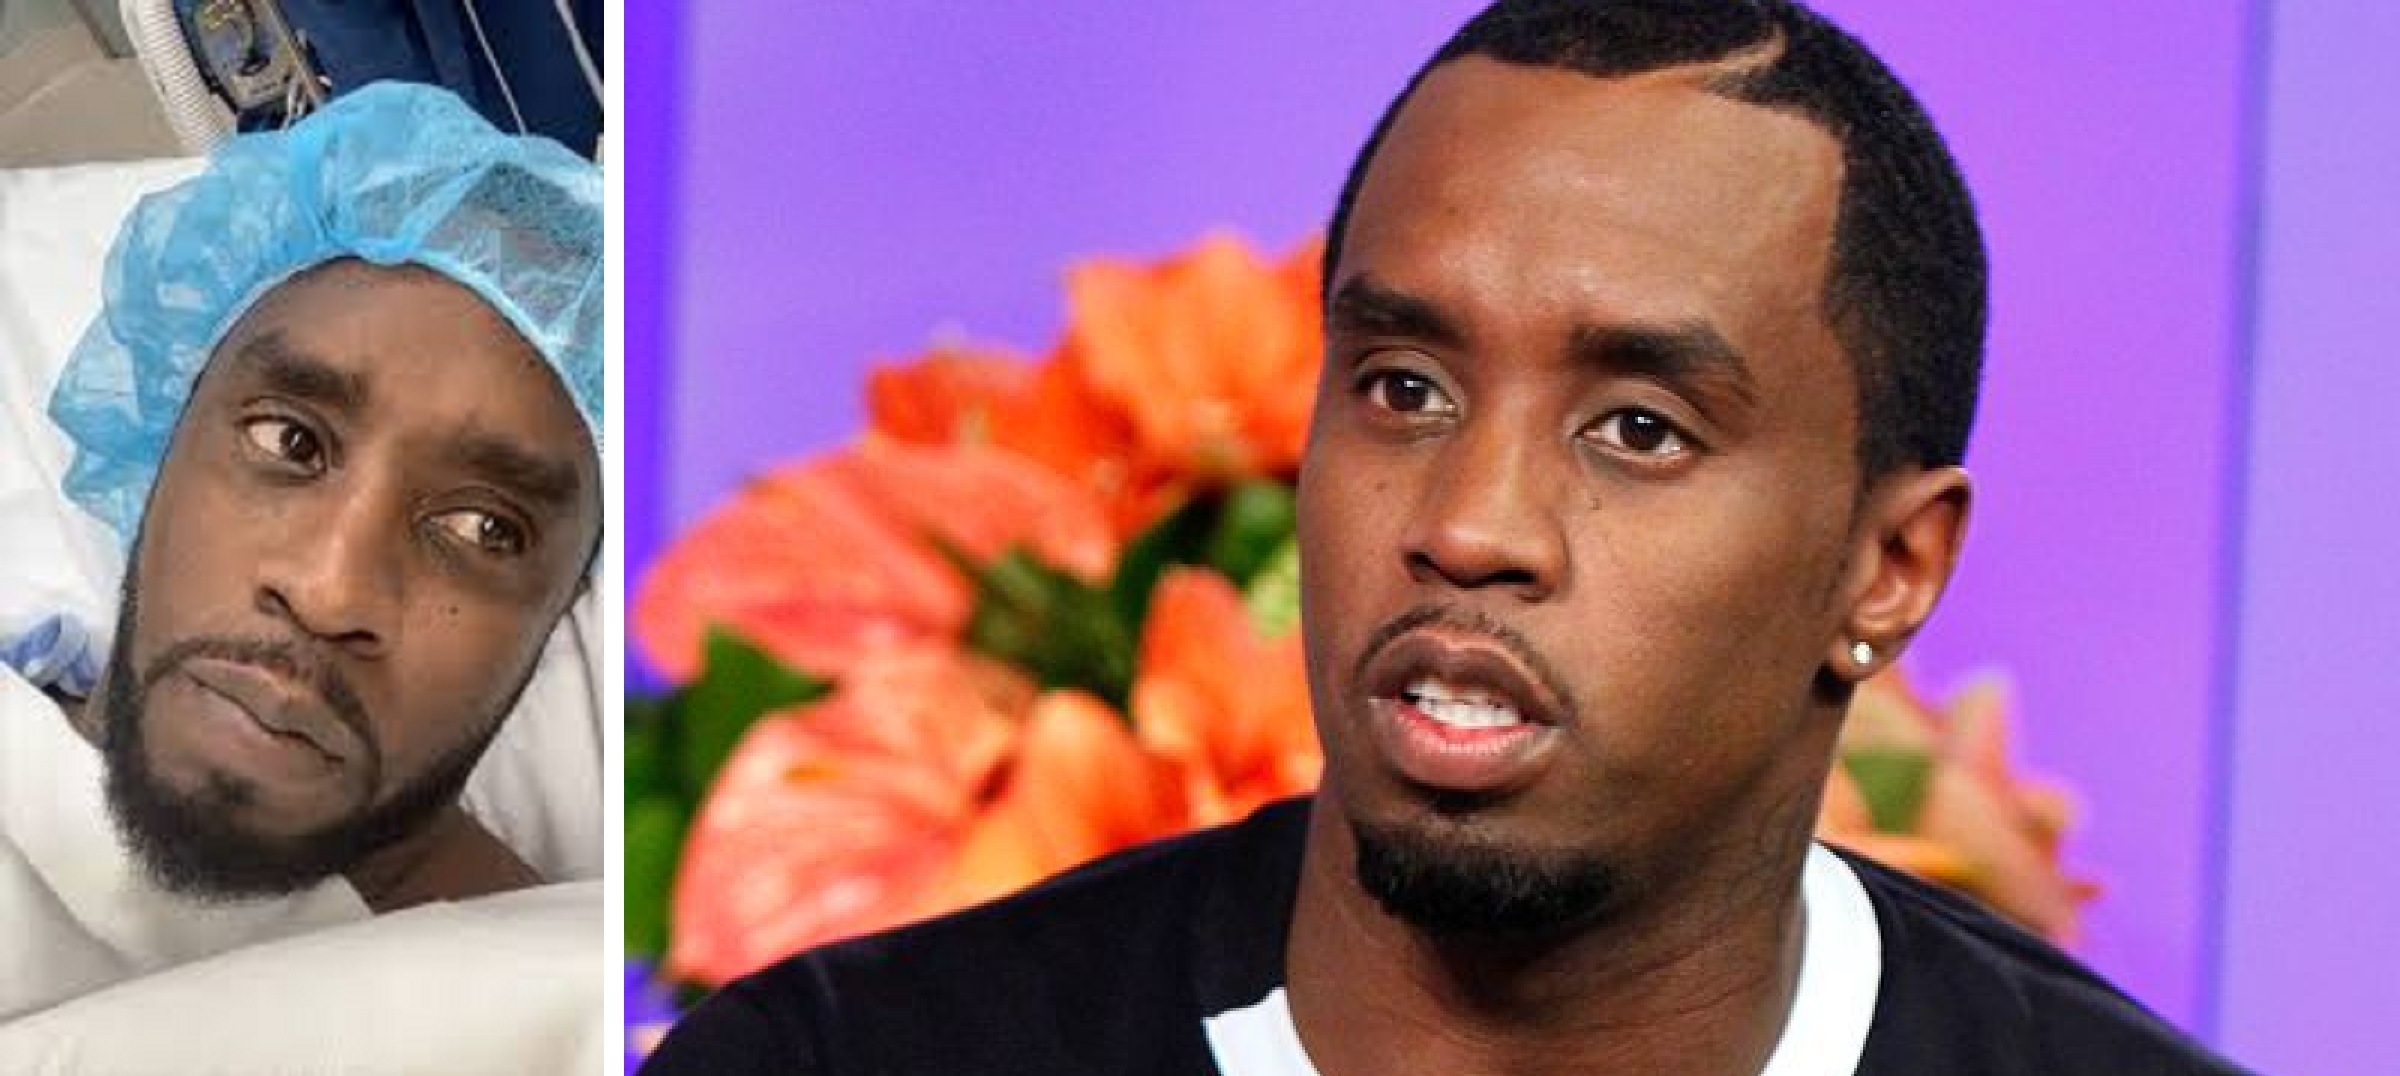 P. Diddy Undergoes His Fourth Surgery in 2 Years. Says It Is “God’s Work to Slow Him Down”